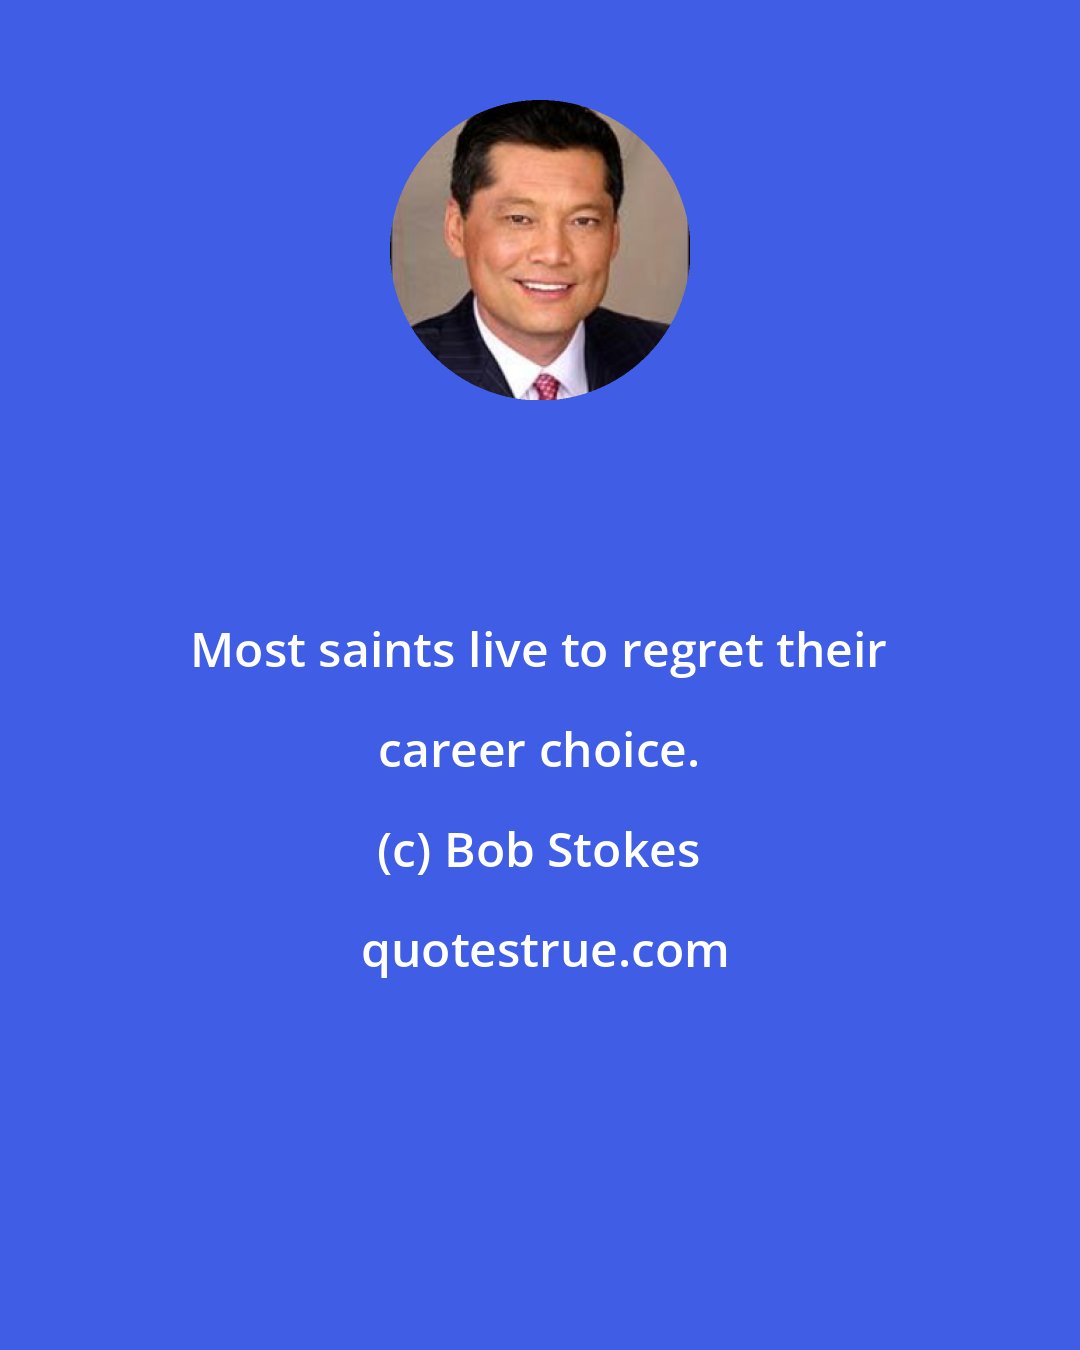 Bob Stokes: Most saints live to regret their career choice.